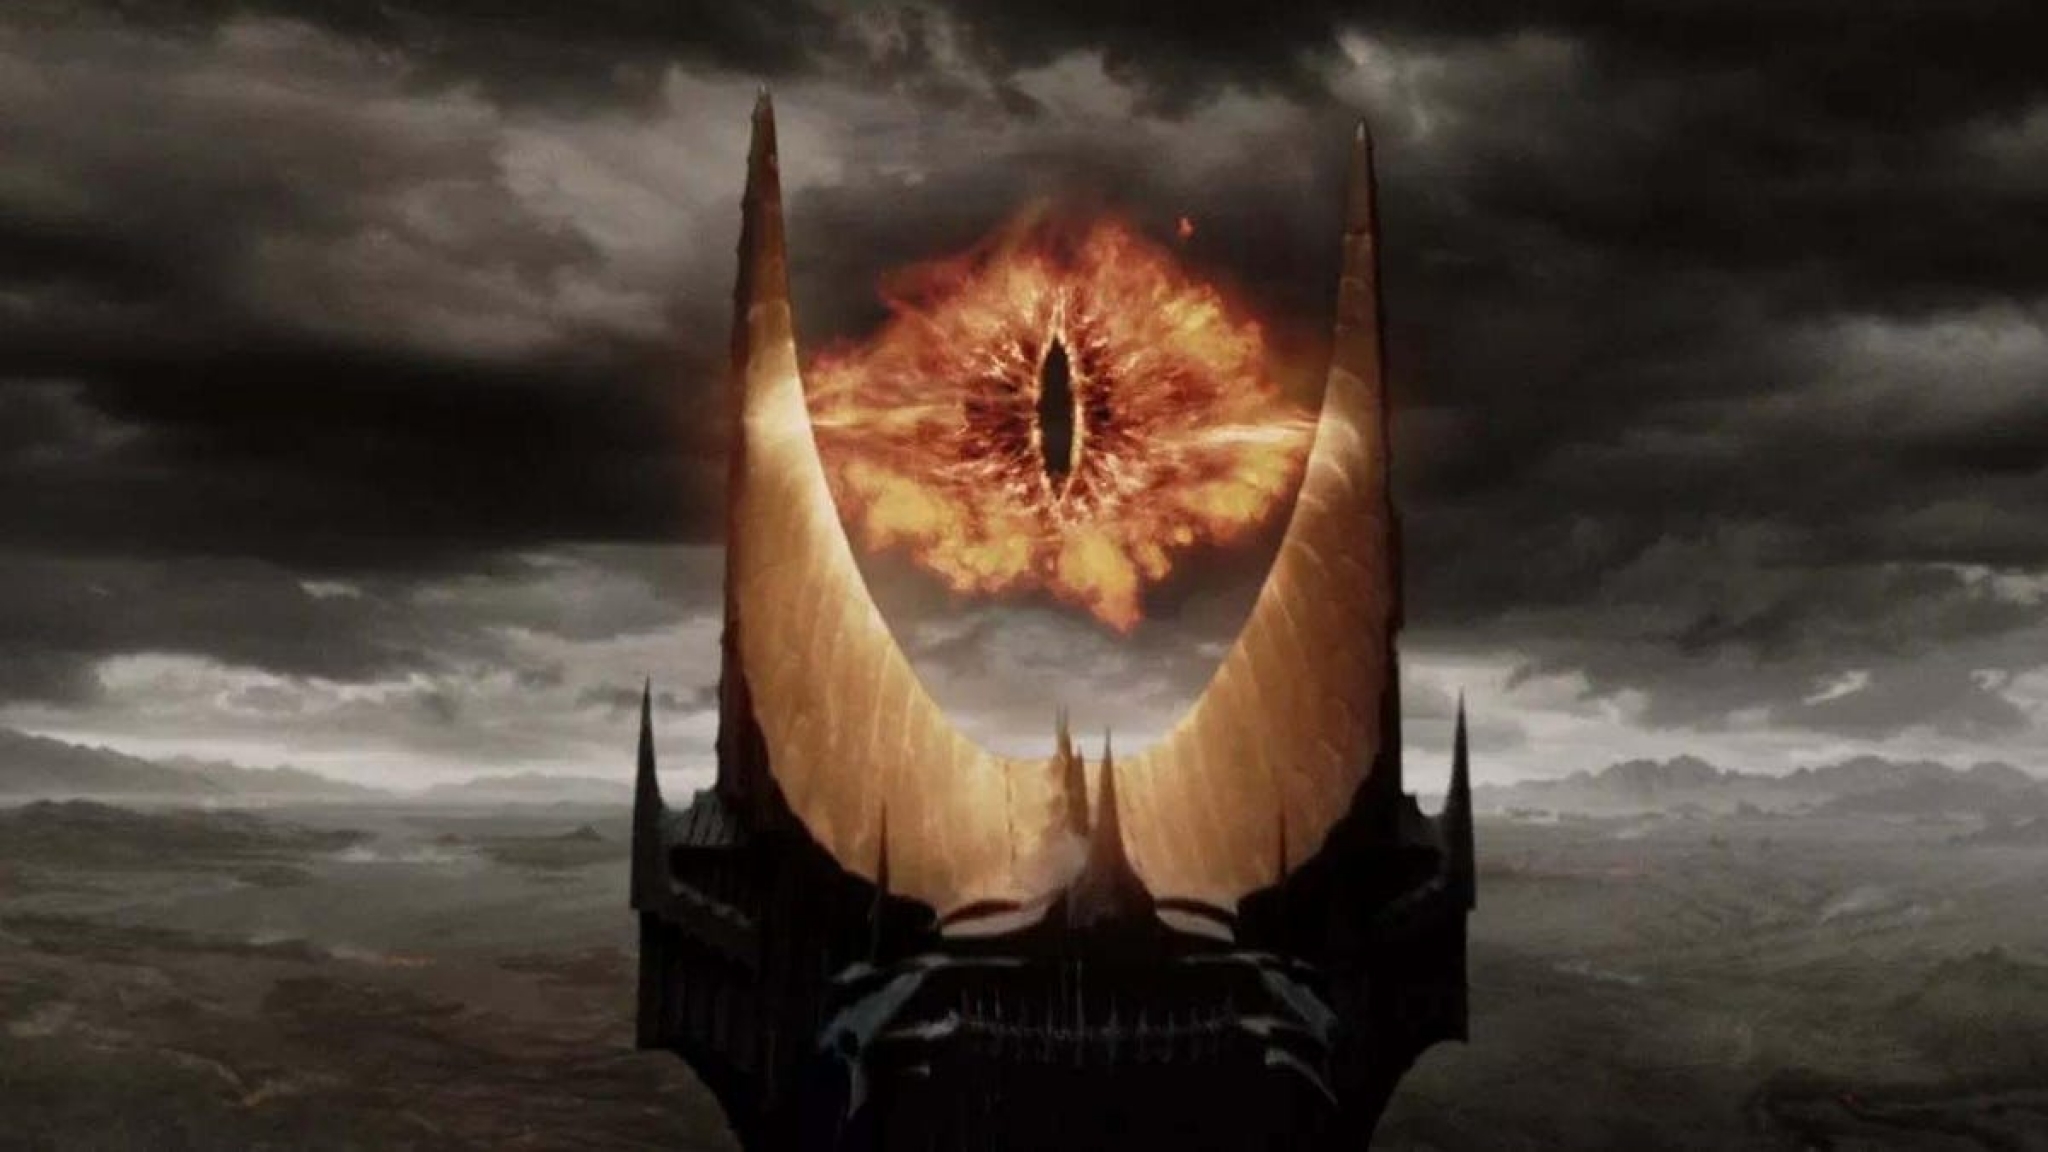 Amazon Explains Lord of the Rings’ Giant Budget, Which Is Still Smaller Than Jeff Bezos’ Yacht